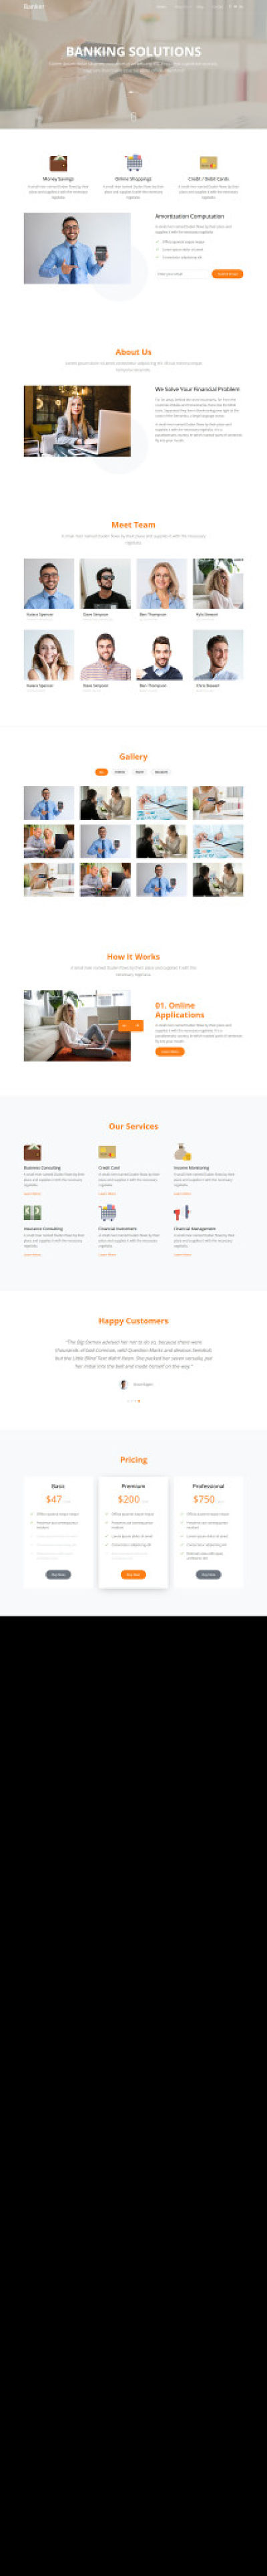 download-35-get-codeigniter-website-template-free-download-png-gif